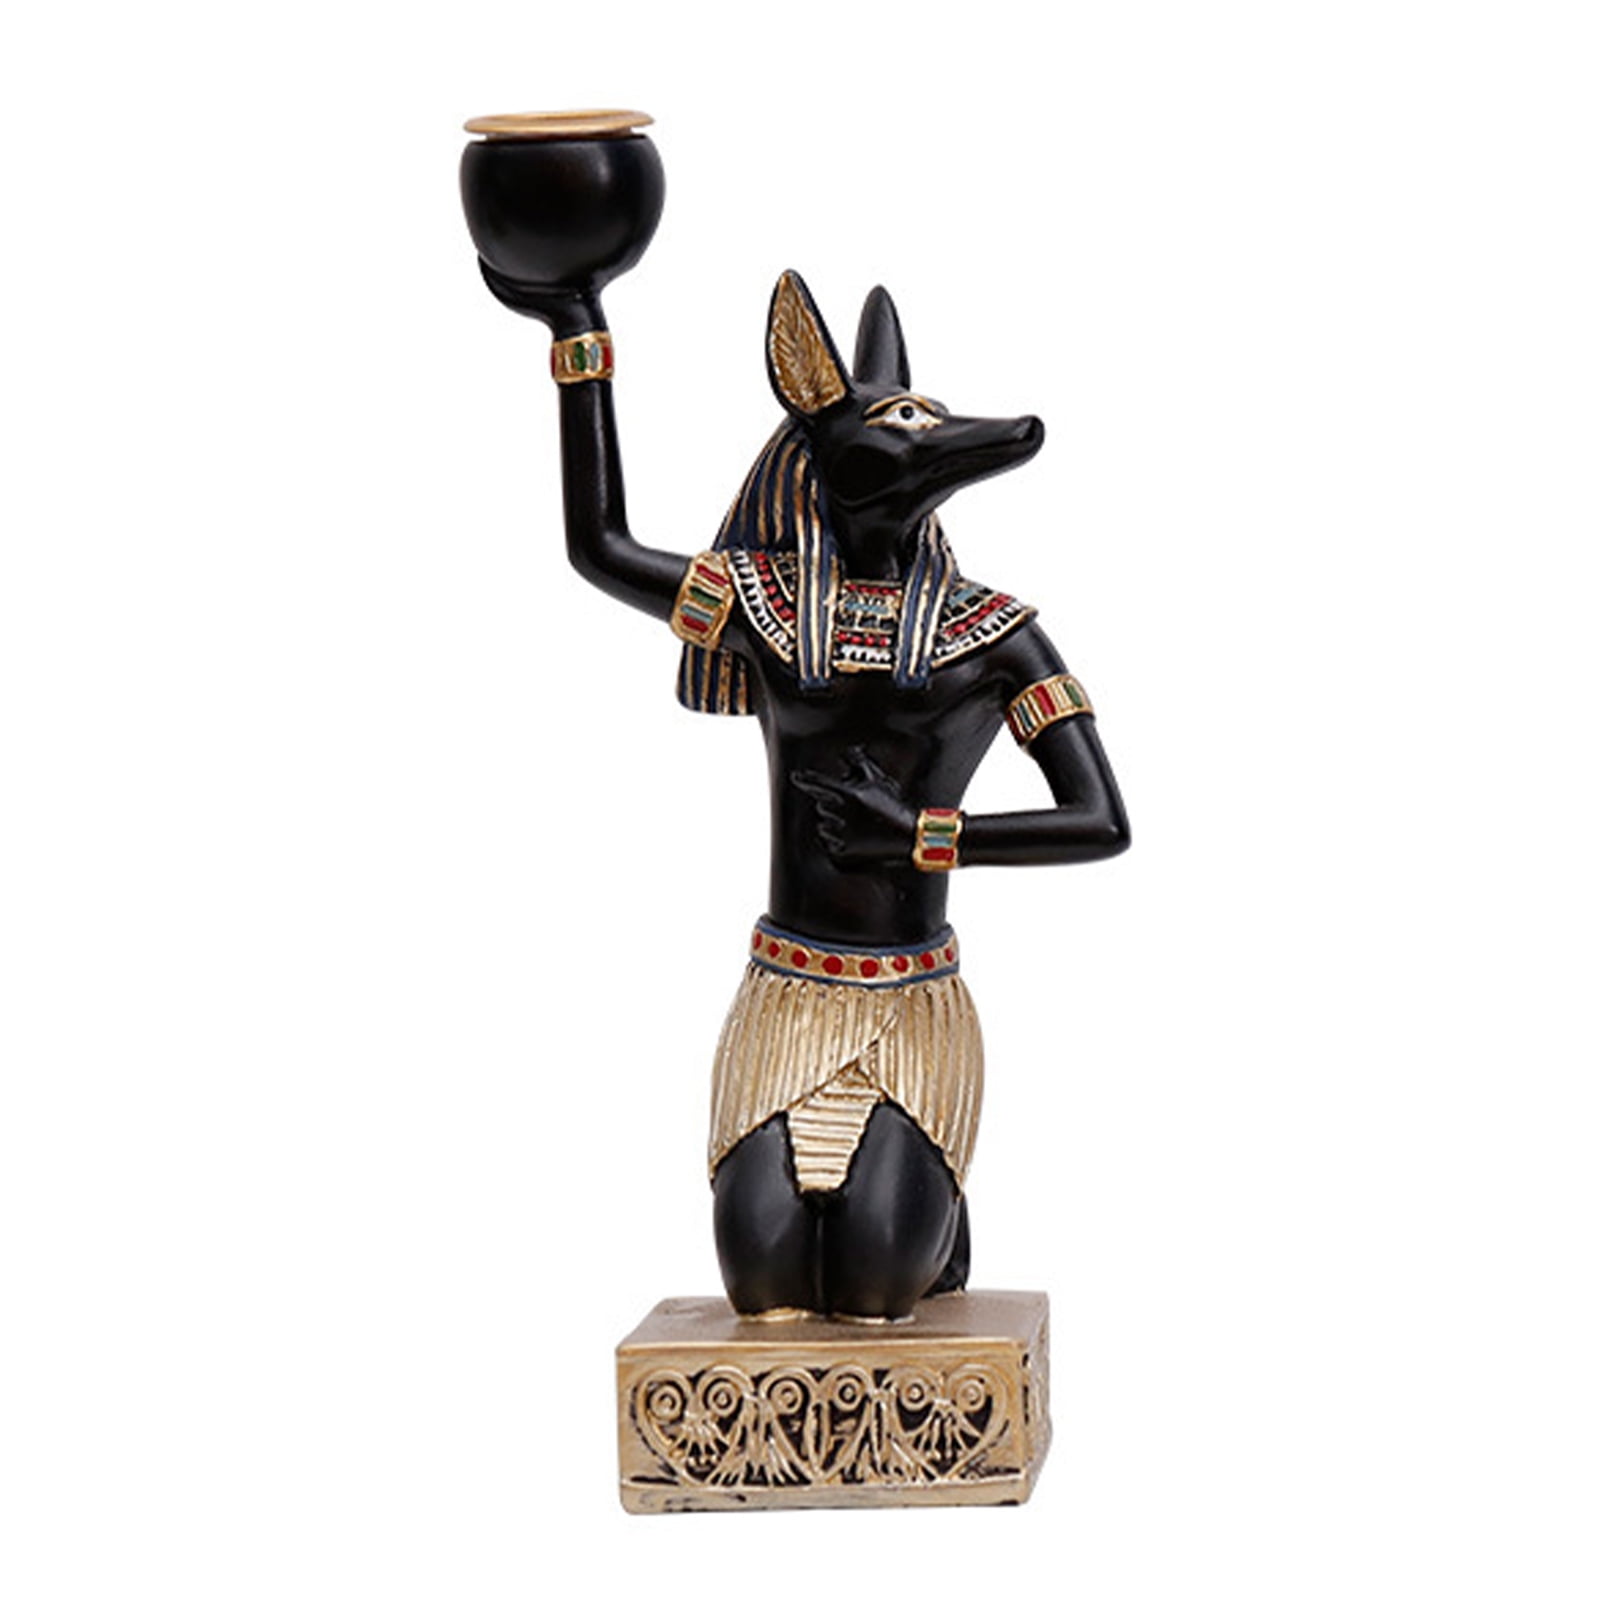 Choose Egyptian sphinx anubis ornament egypt figure decoration gift OR WHOLE SET 